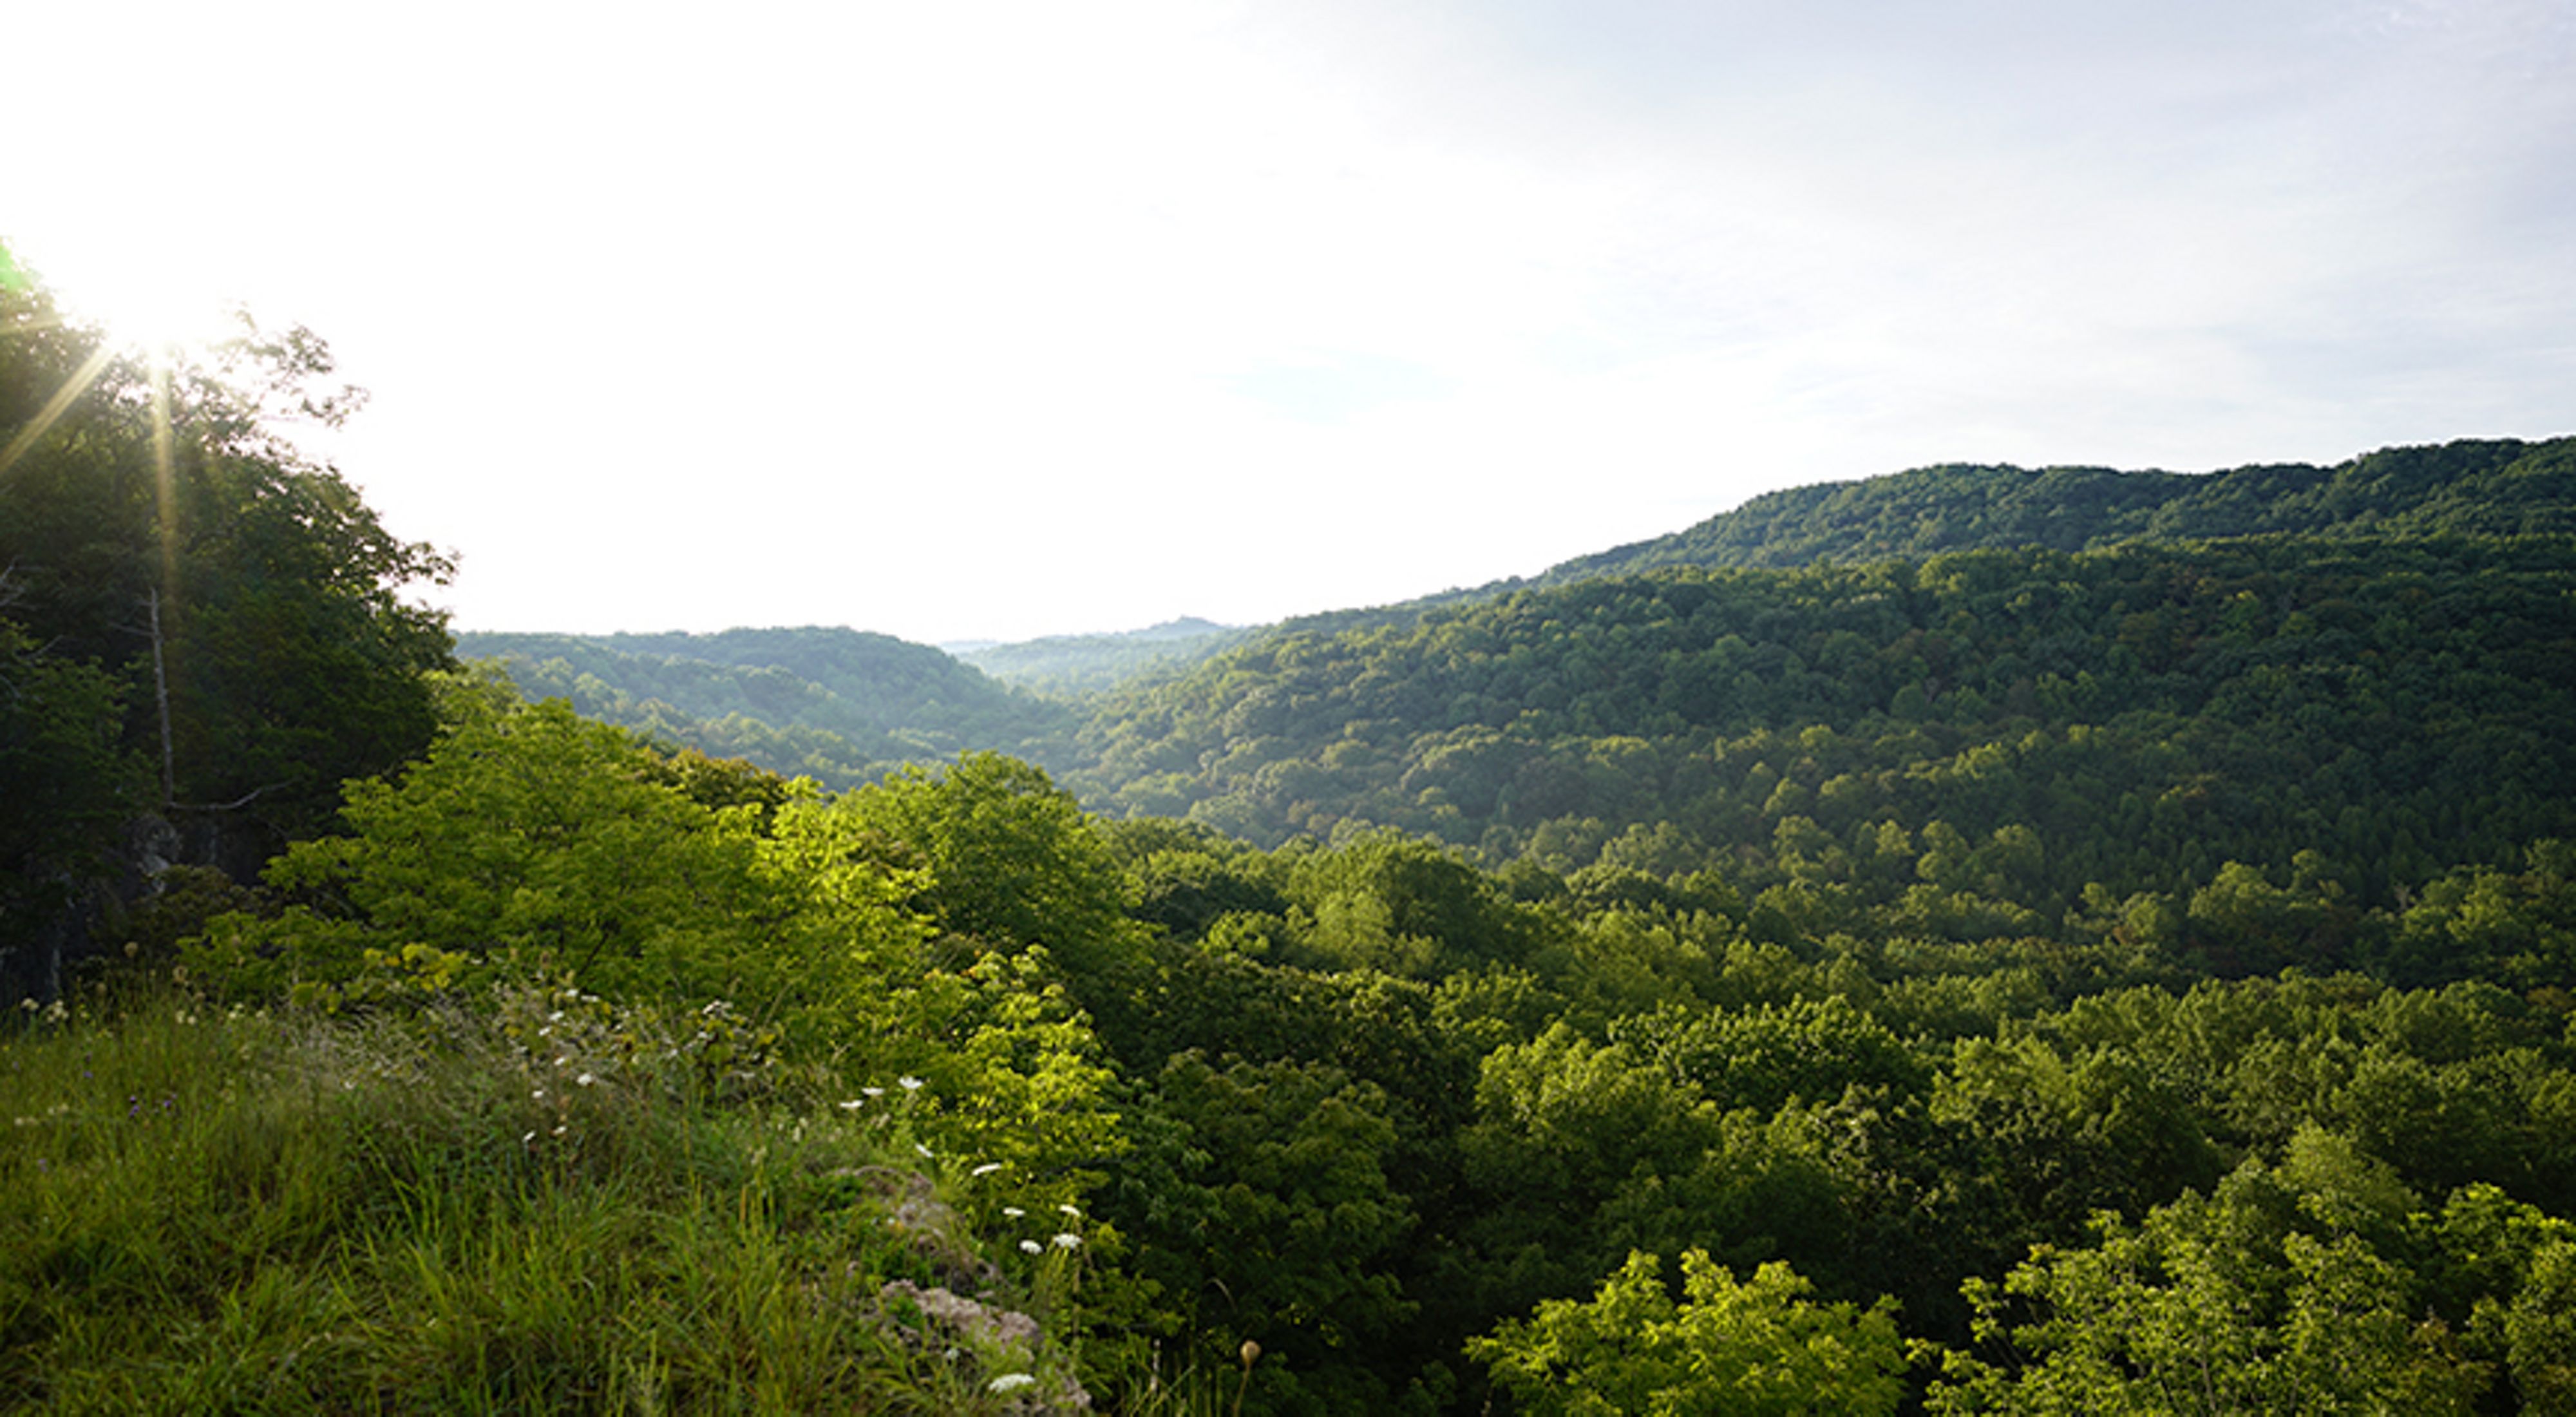 The morning sun shines over miles of overlapping forested hills with summer green foliage.